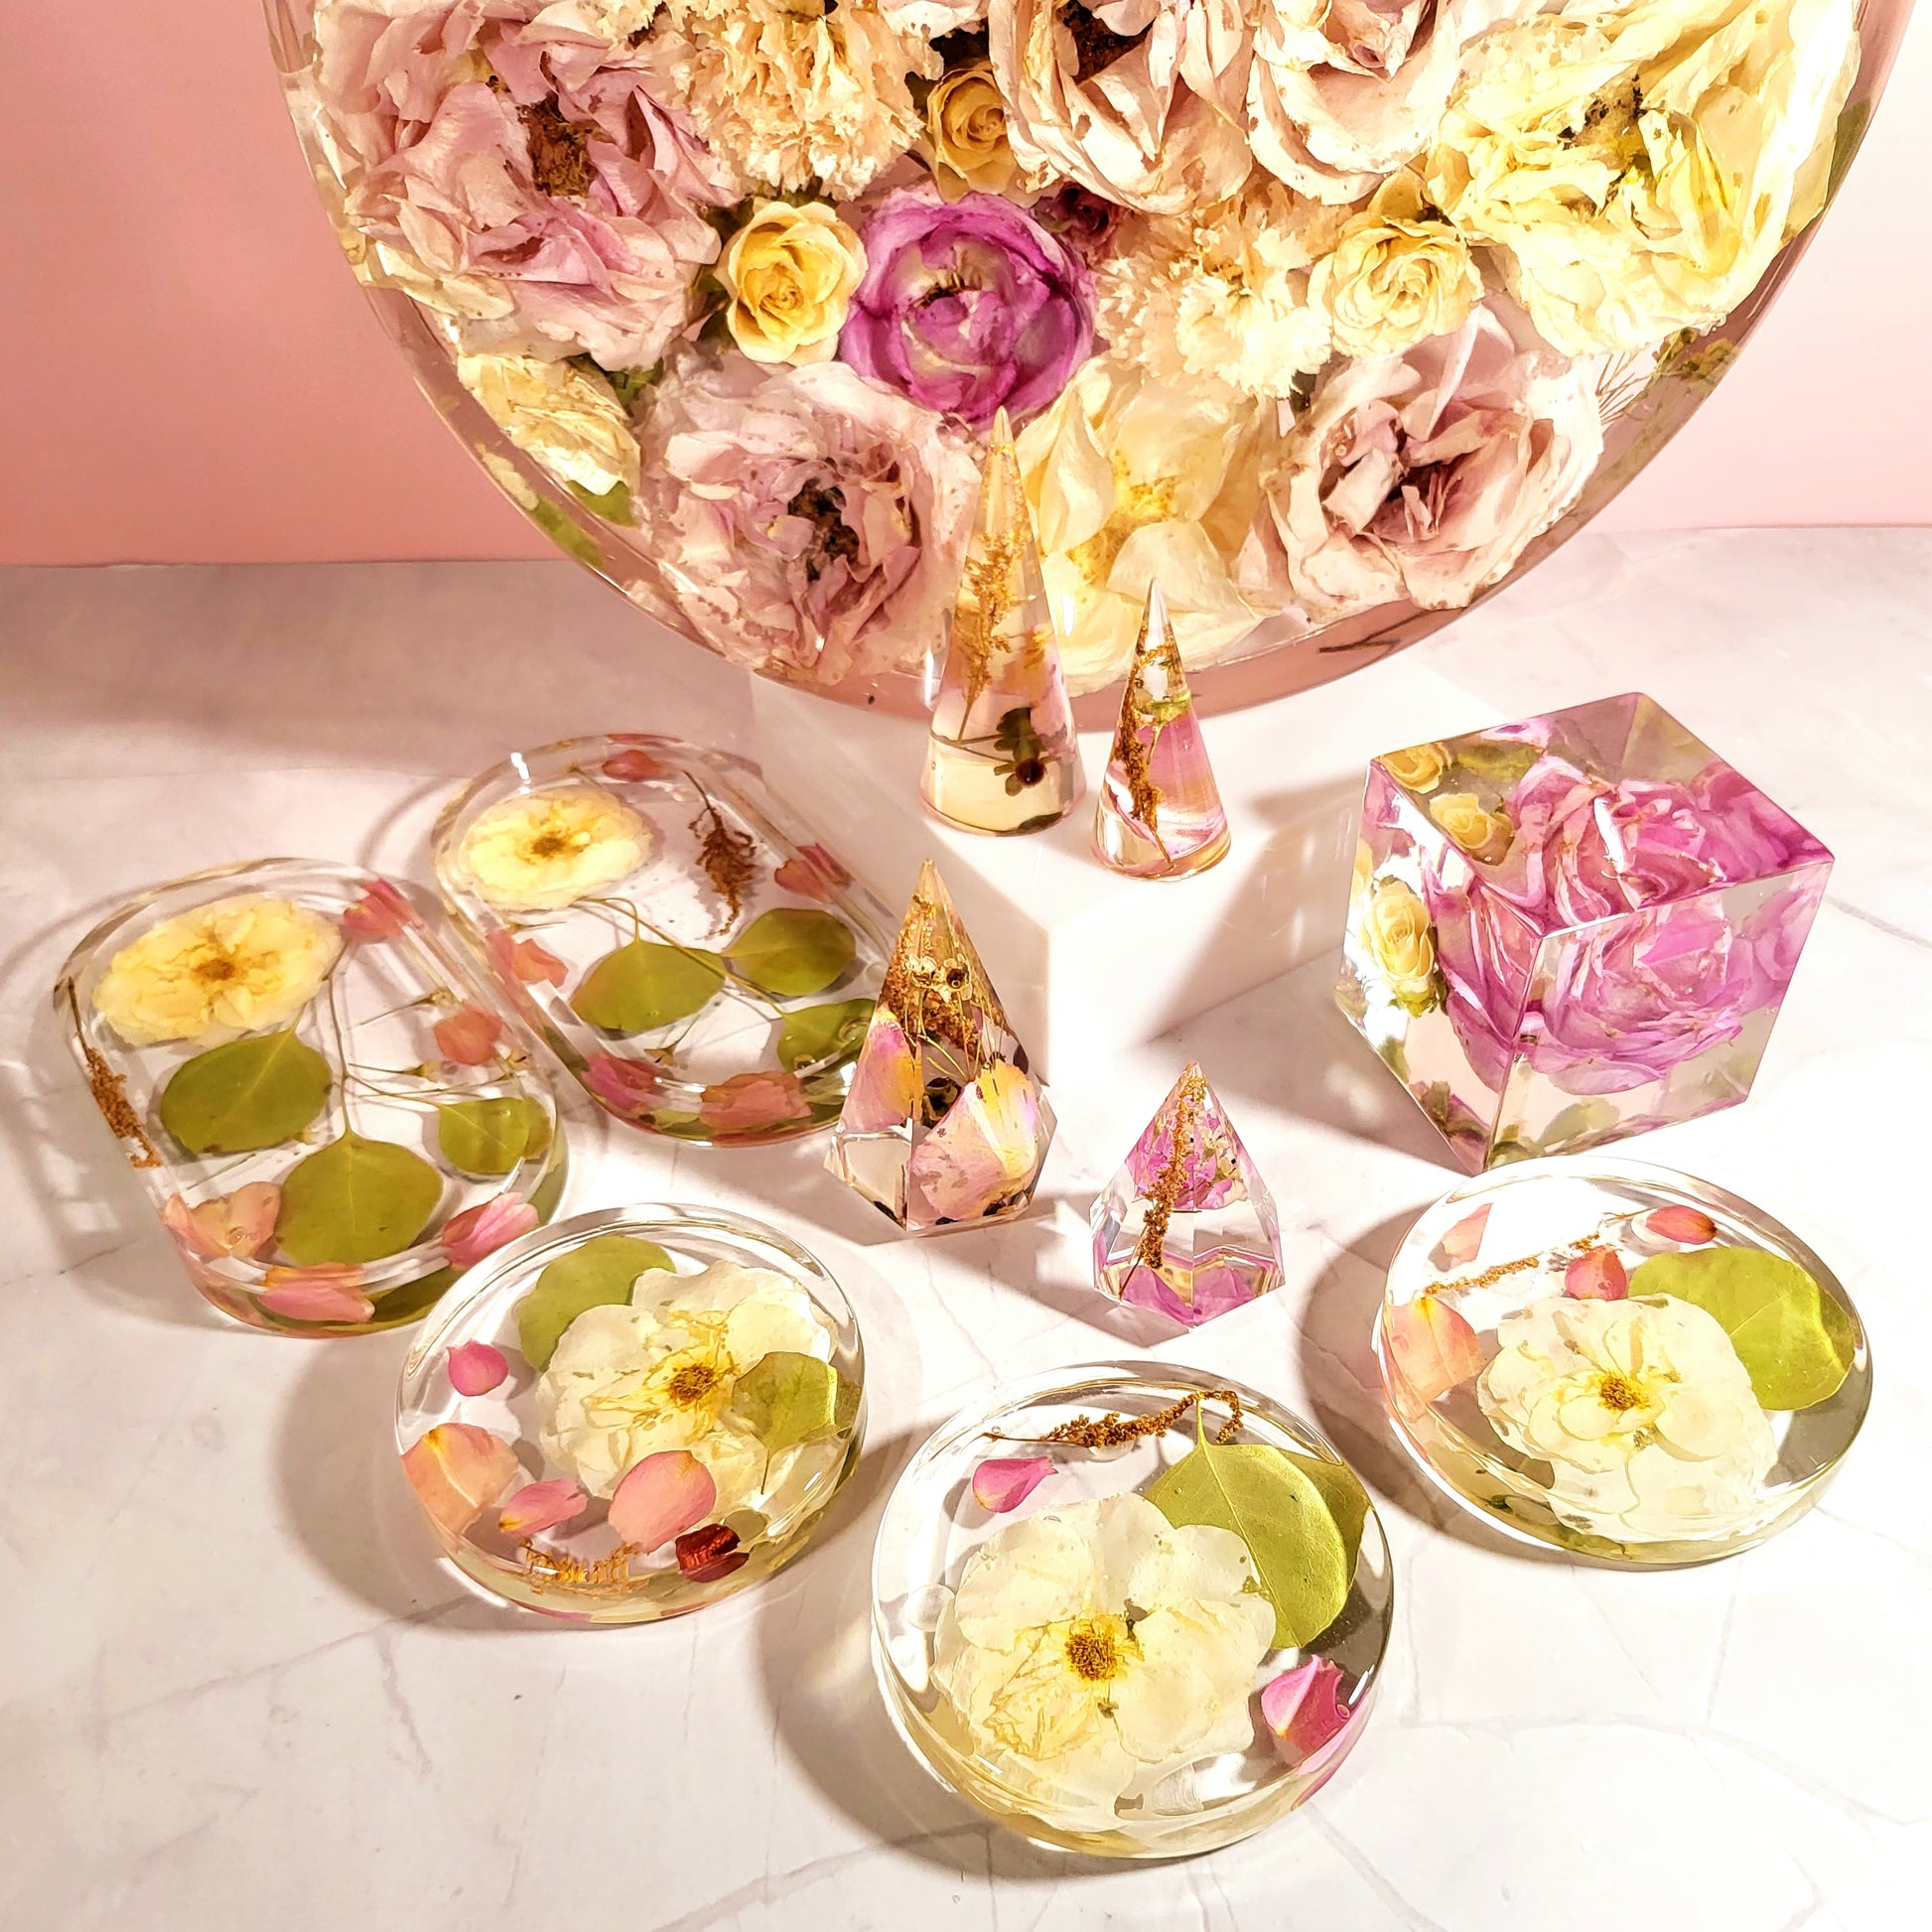 DIY Wedding Bouquet Keepsake Resin Cube Large Heart Flowers Preservation  Gift Resin Molds - Silicone Molds Wholesale & Retail - Fondant, Soap,  Candy, DIY Cake Molds